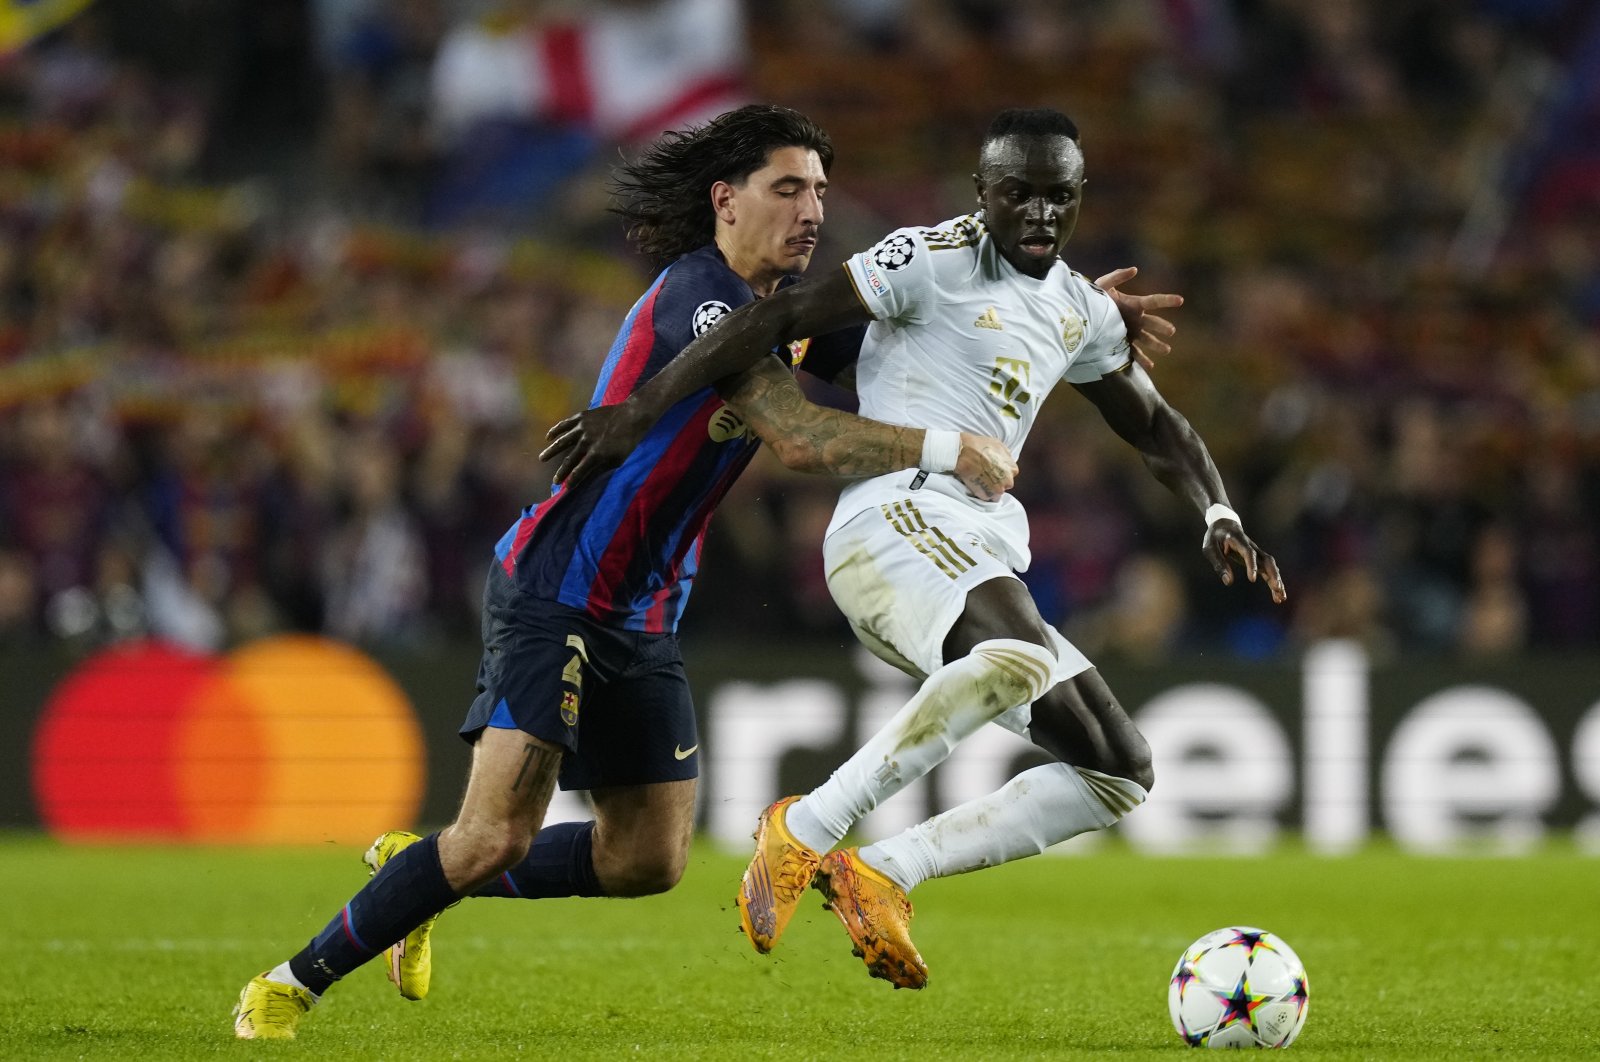 FC Barcelona&#039;s Hector Bellerin (L) in action against FC Bayern&#039;s Sadio Mane during the UEFA Champions League group C match between FC Barcelona and FC Bayern Munich at the Spotify Camp Nou stadium, Barcelona, Spain, Oct. 2022. (EPA Photo)